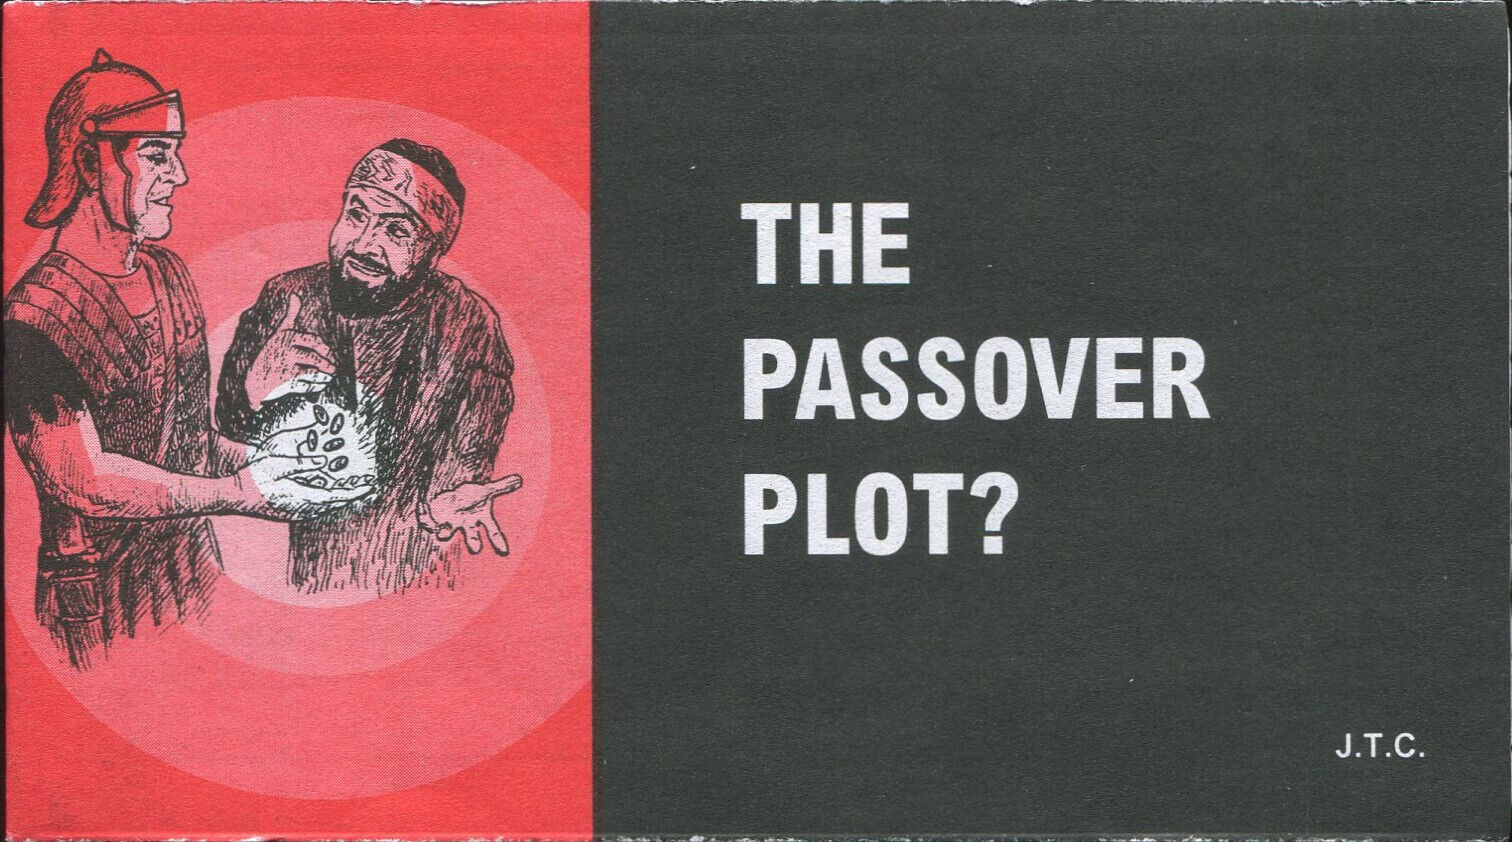 New OOP The Passover Plot? Chick Publications Tract - Jack